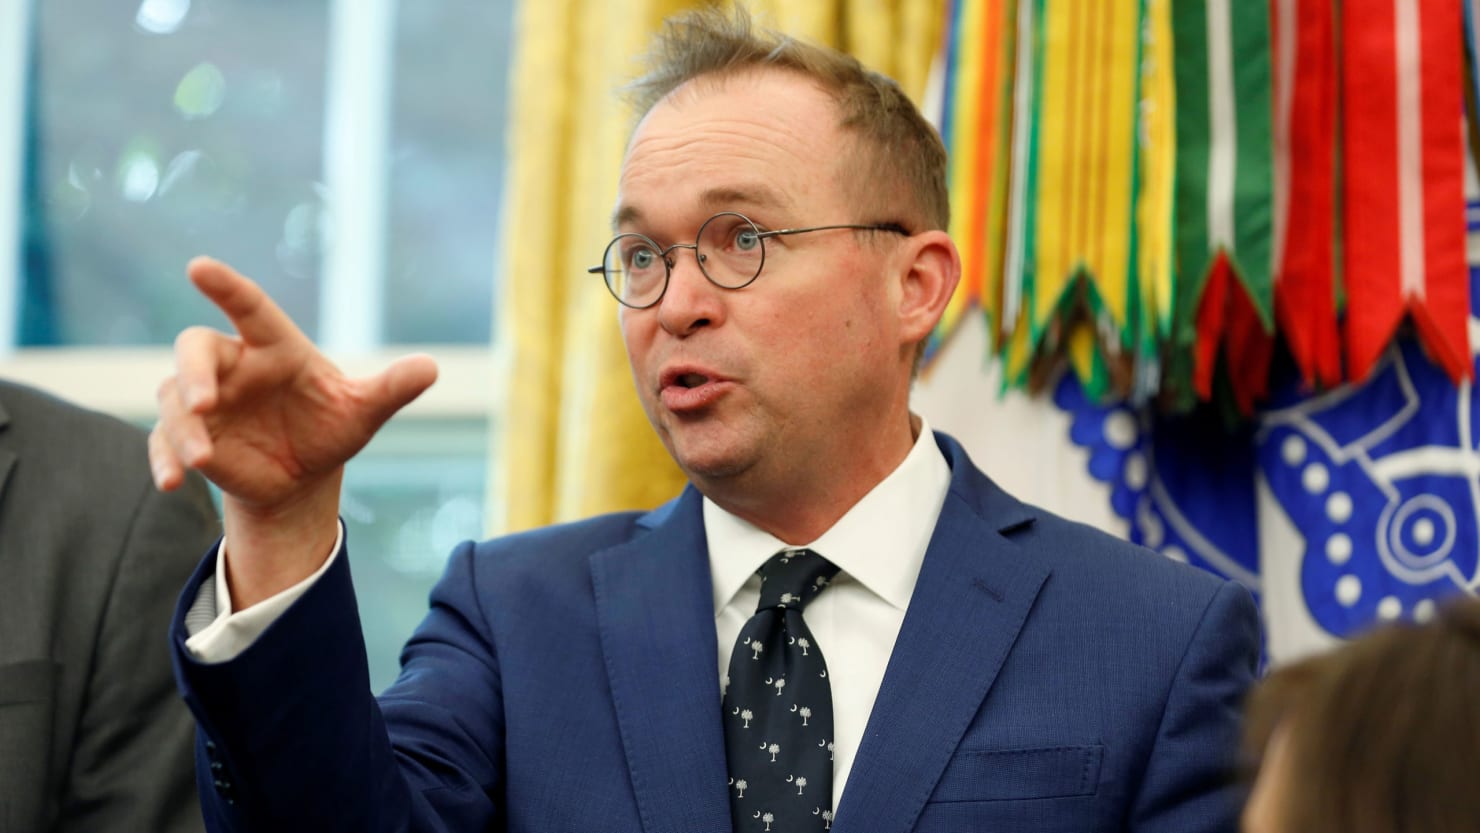 Incoming Chief of Staff Mick Mulvaney: ‘Very Possible’ Shutdown Could Go into 20191480 x 833